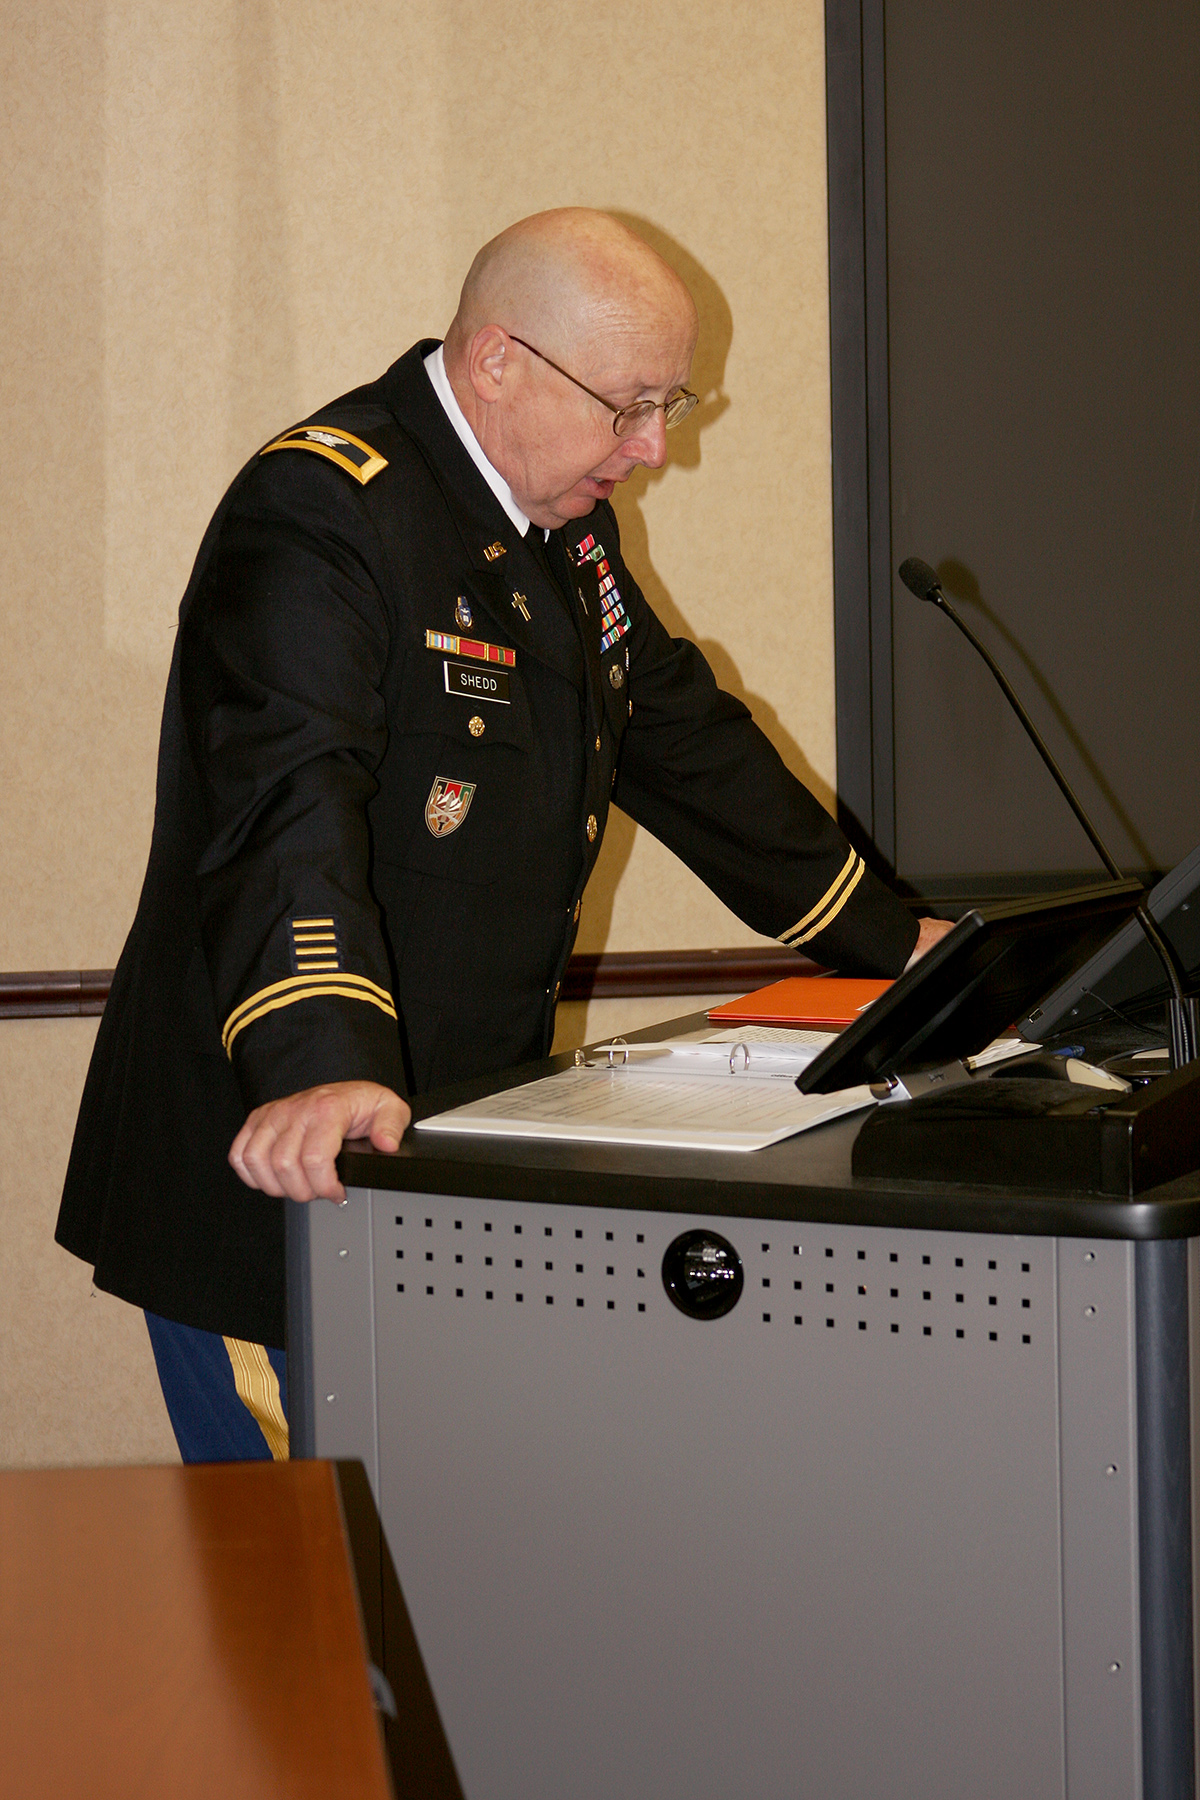 man in military dress suit looking over a desk